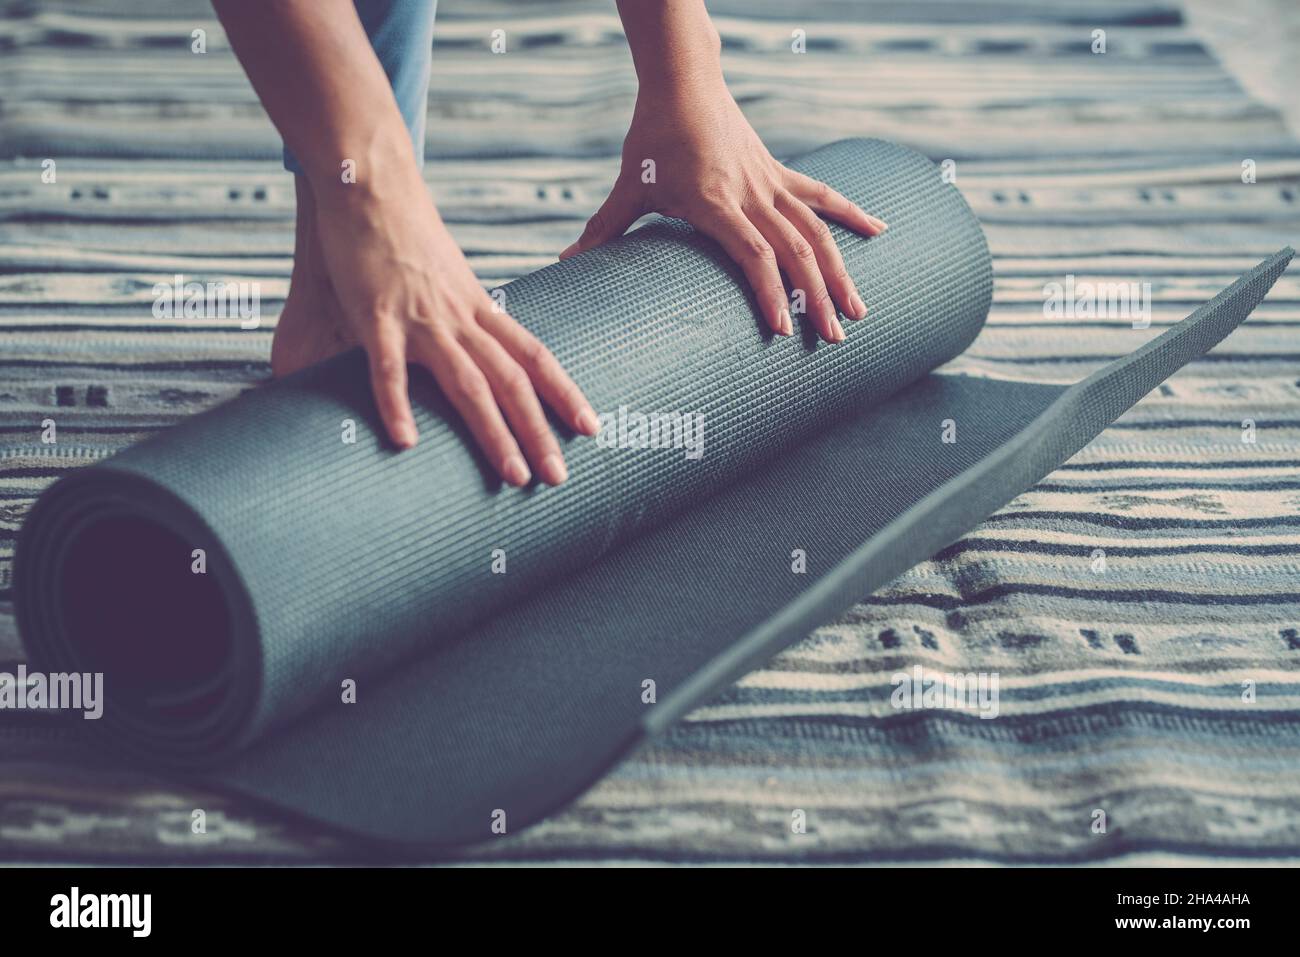 healthy fitness woman hands rolling up mat after exercise on floor in living room,woman doing exercise at home. hands of woman rolling or unrolling yoga mat on floor at home Stock Photo